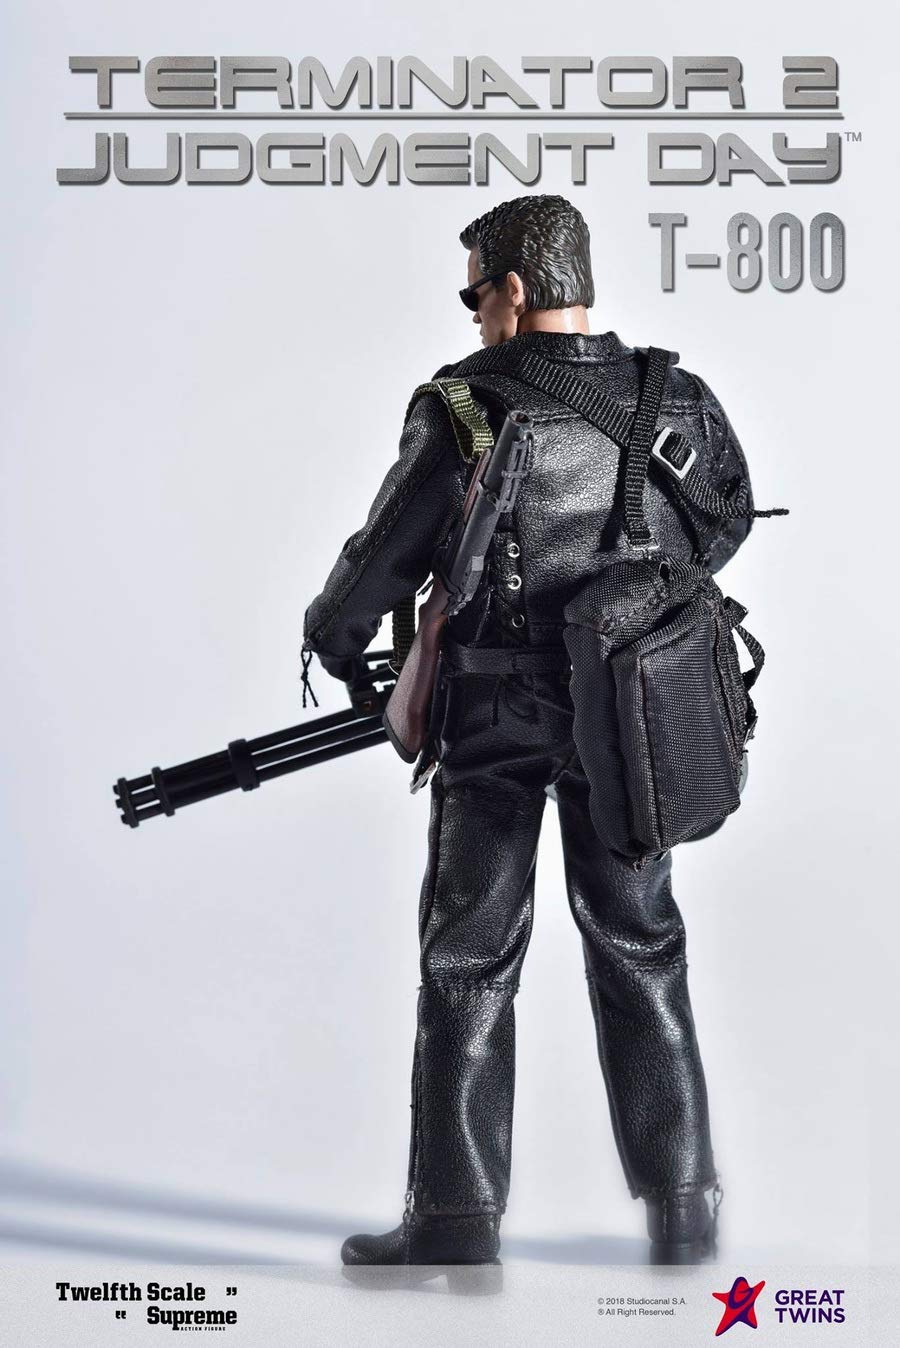 Great Twins 1/12 T-800 Terminator 2 Judgement Day Action Figure